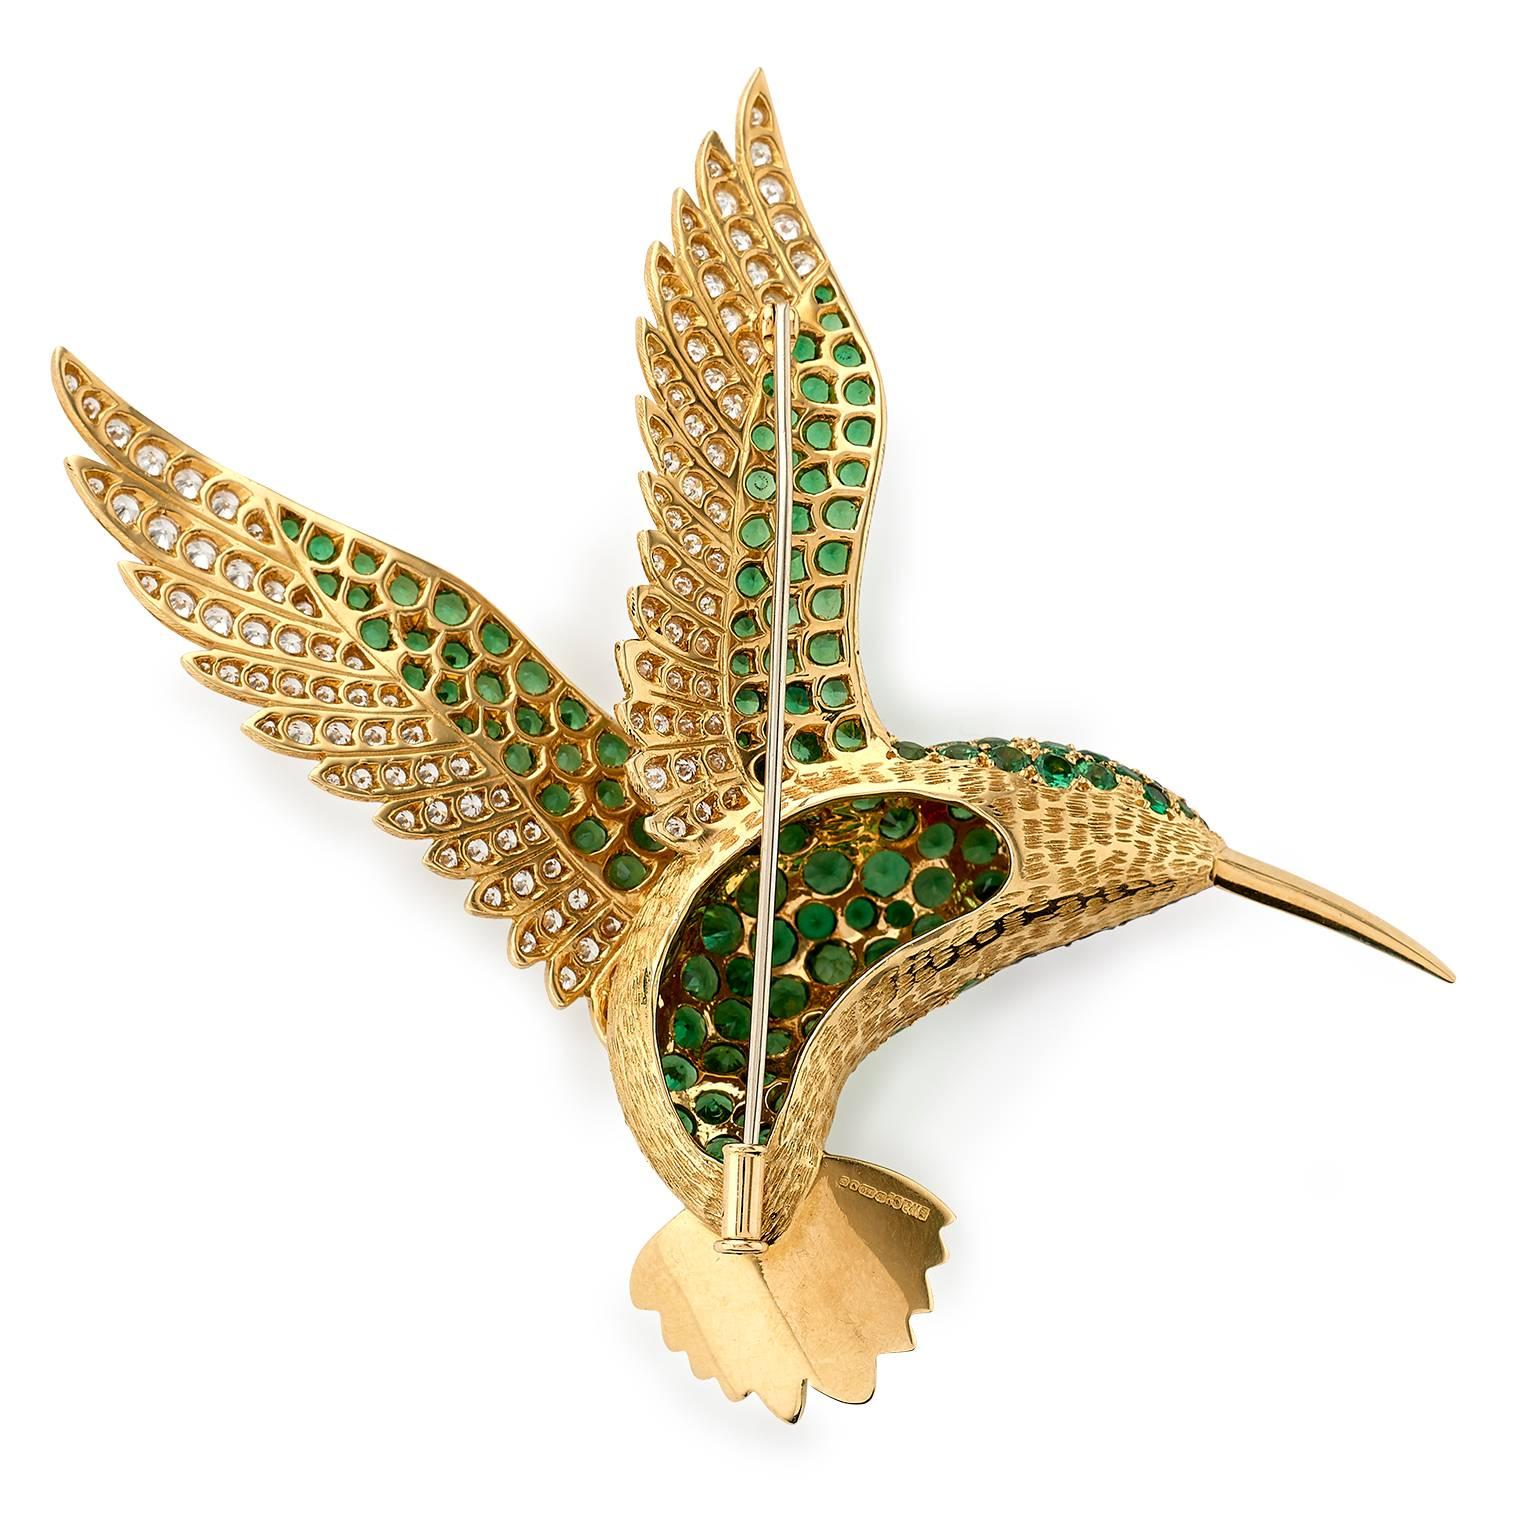 Hummingbird brooch made in 18 carat yellow gold and set with 2.10 carats white diamonds to wing, 10.50 carats tsavorite garnets to his body, .80 carats rubies and black onyx eye. With easy to use yet secure tube catch fitting to the back of the